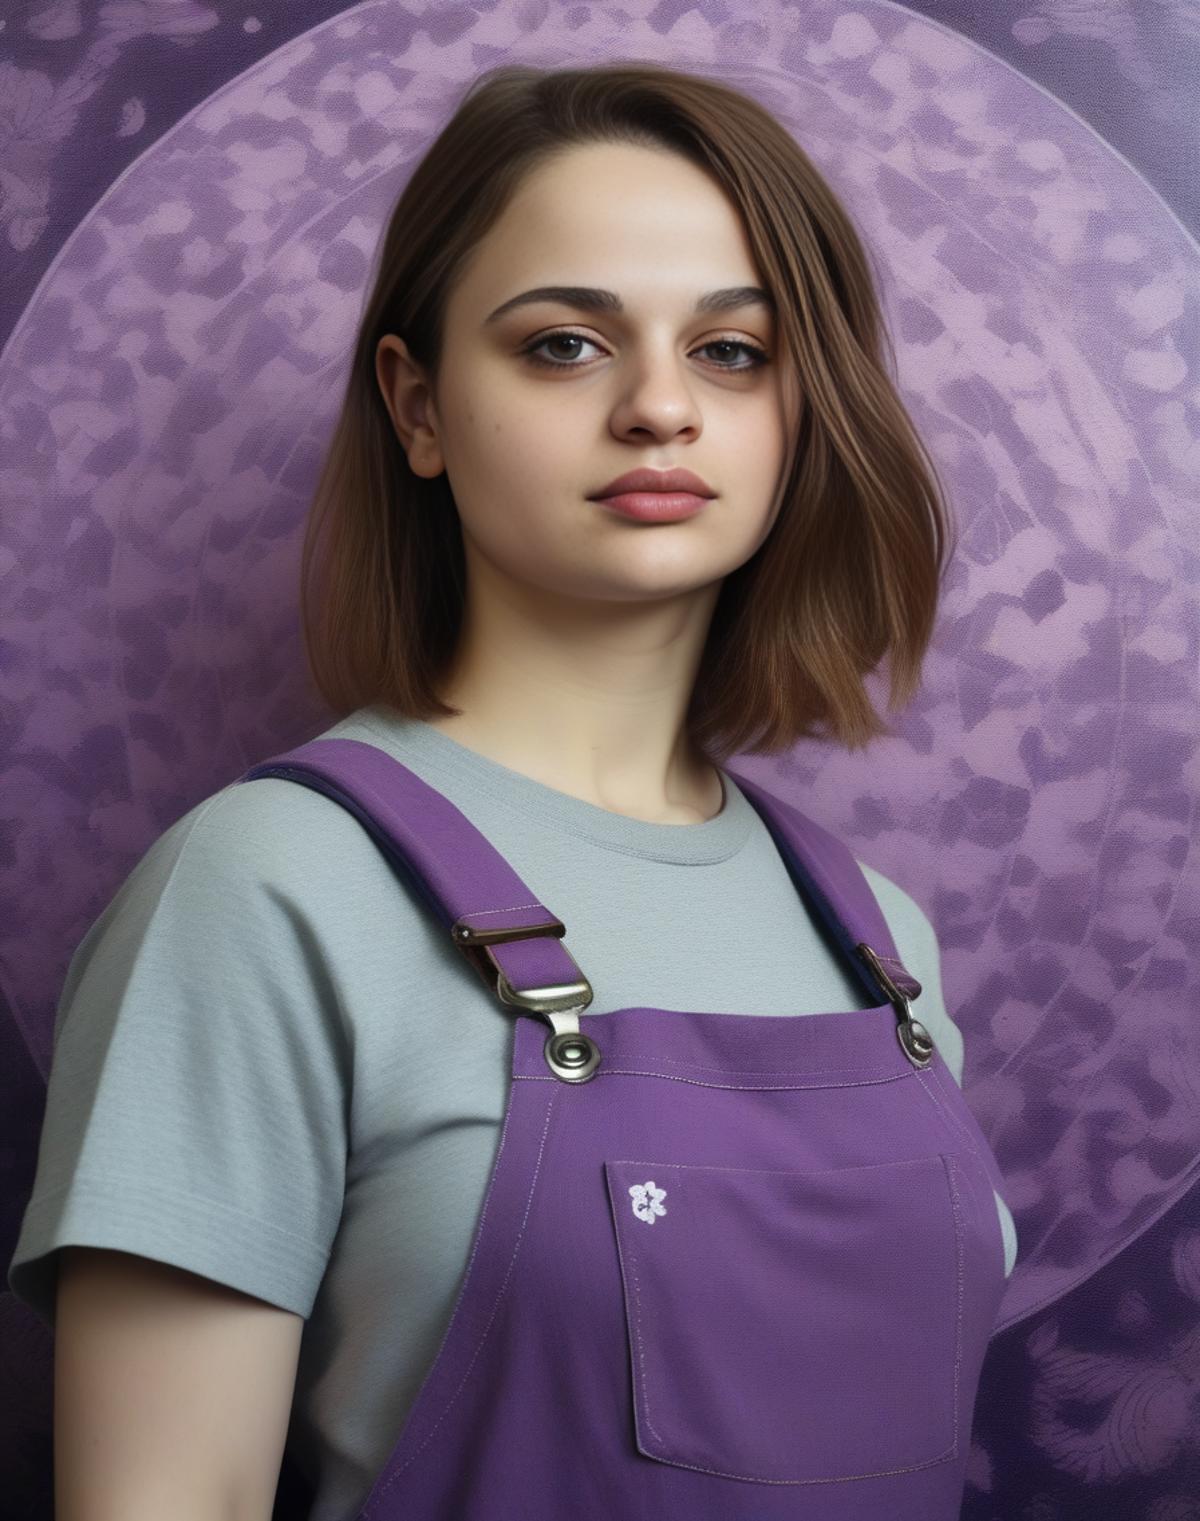 Joey King image by parar20